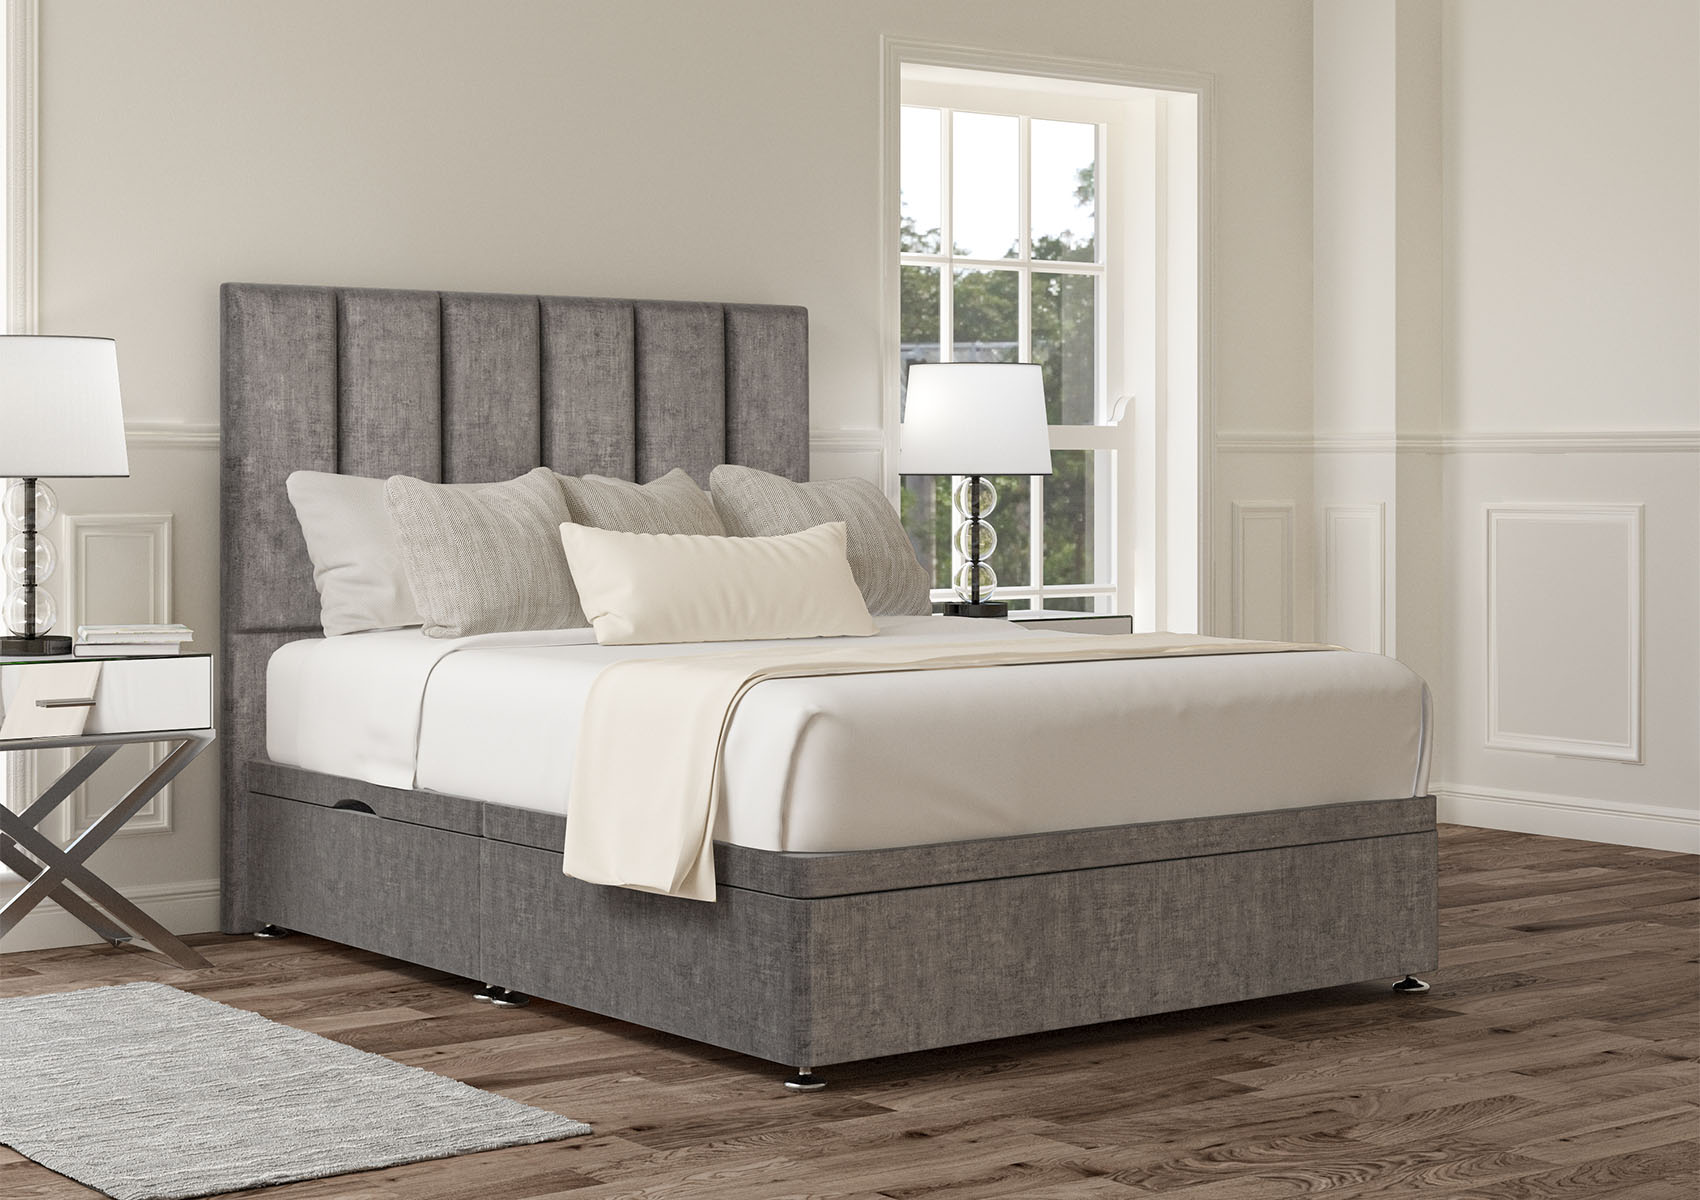 View Empire Heritage Royal Upholstered King Size Ottoman Bed Time4Sleep information